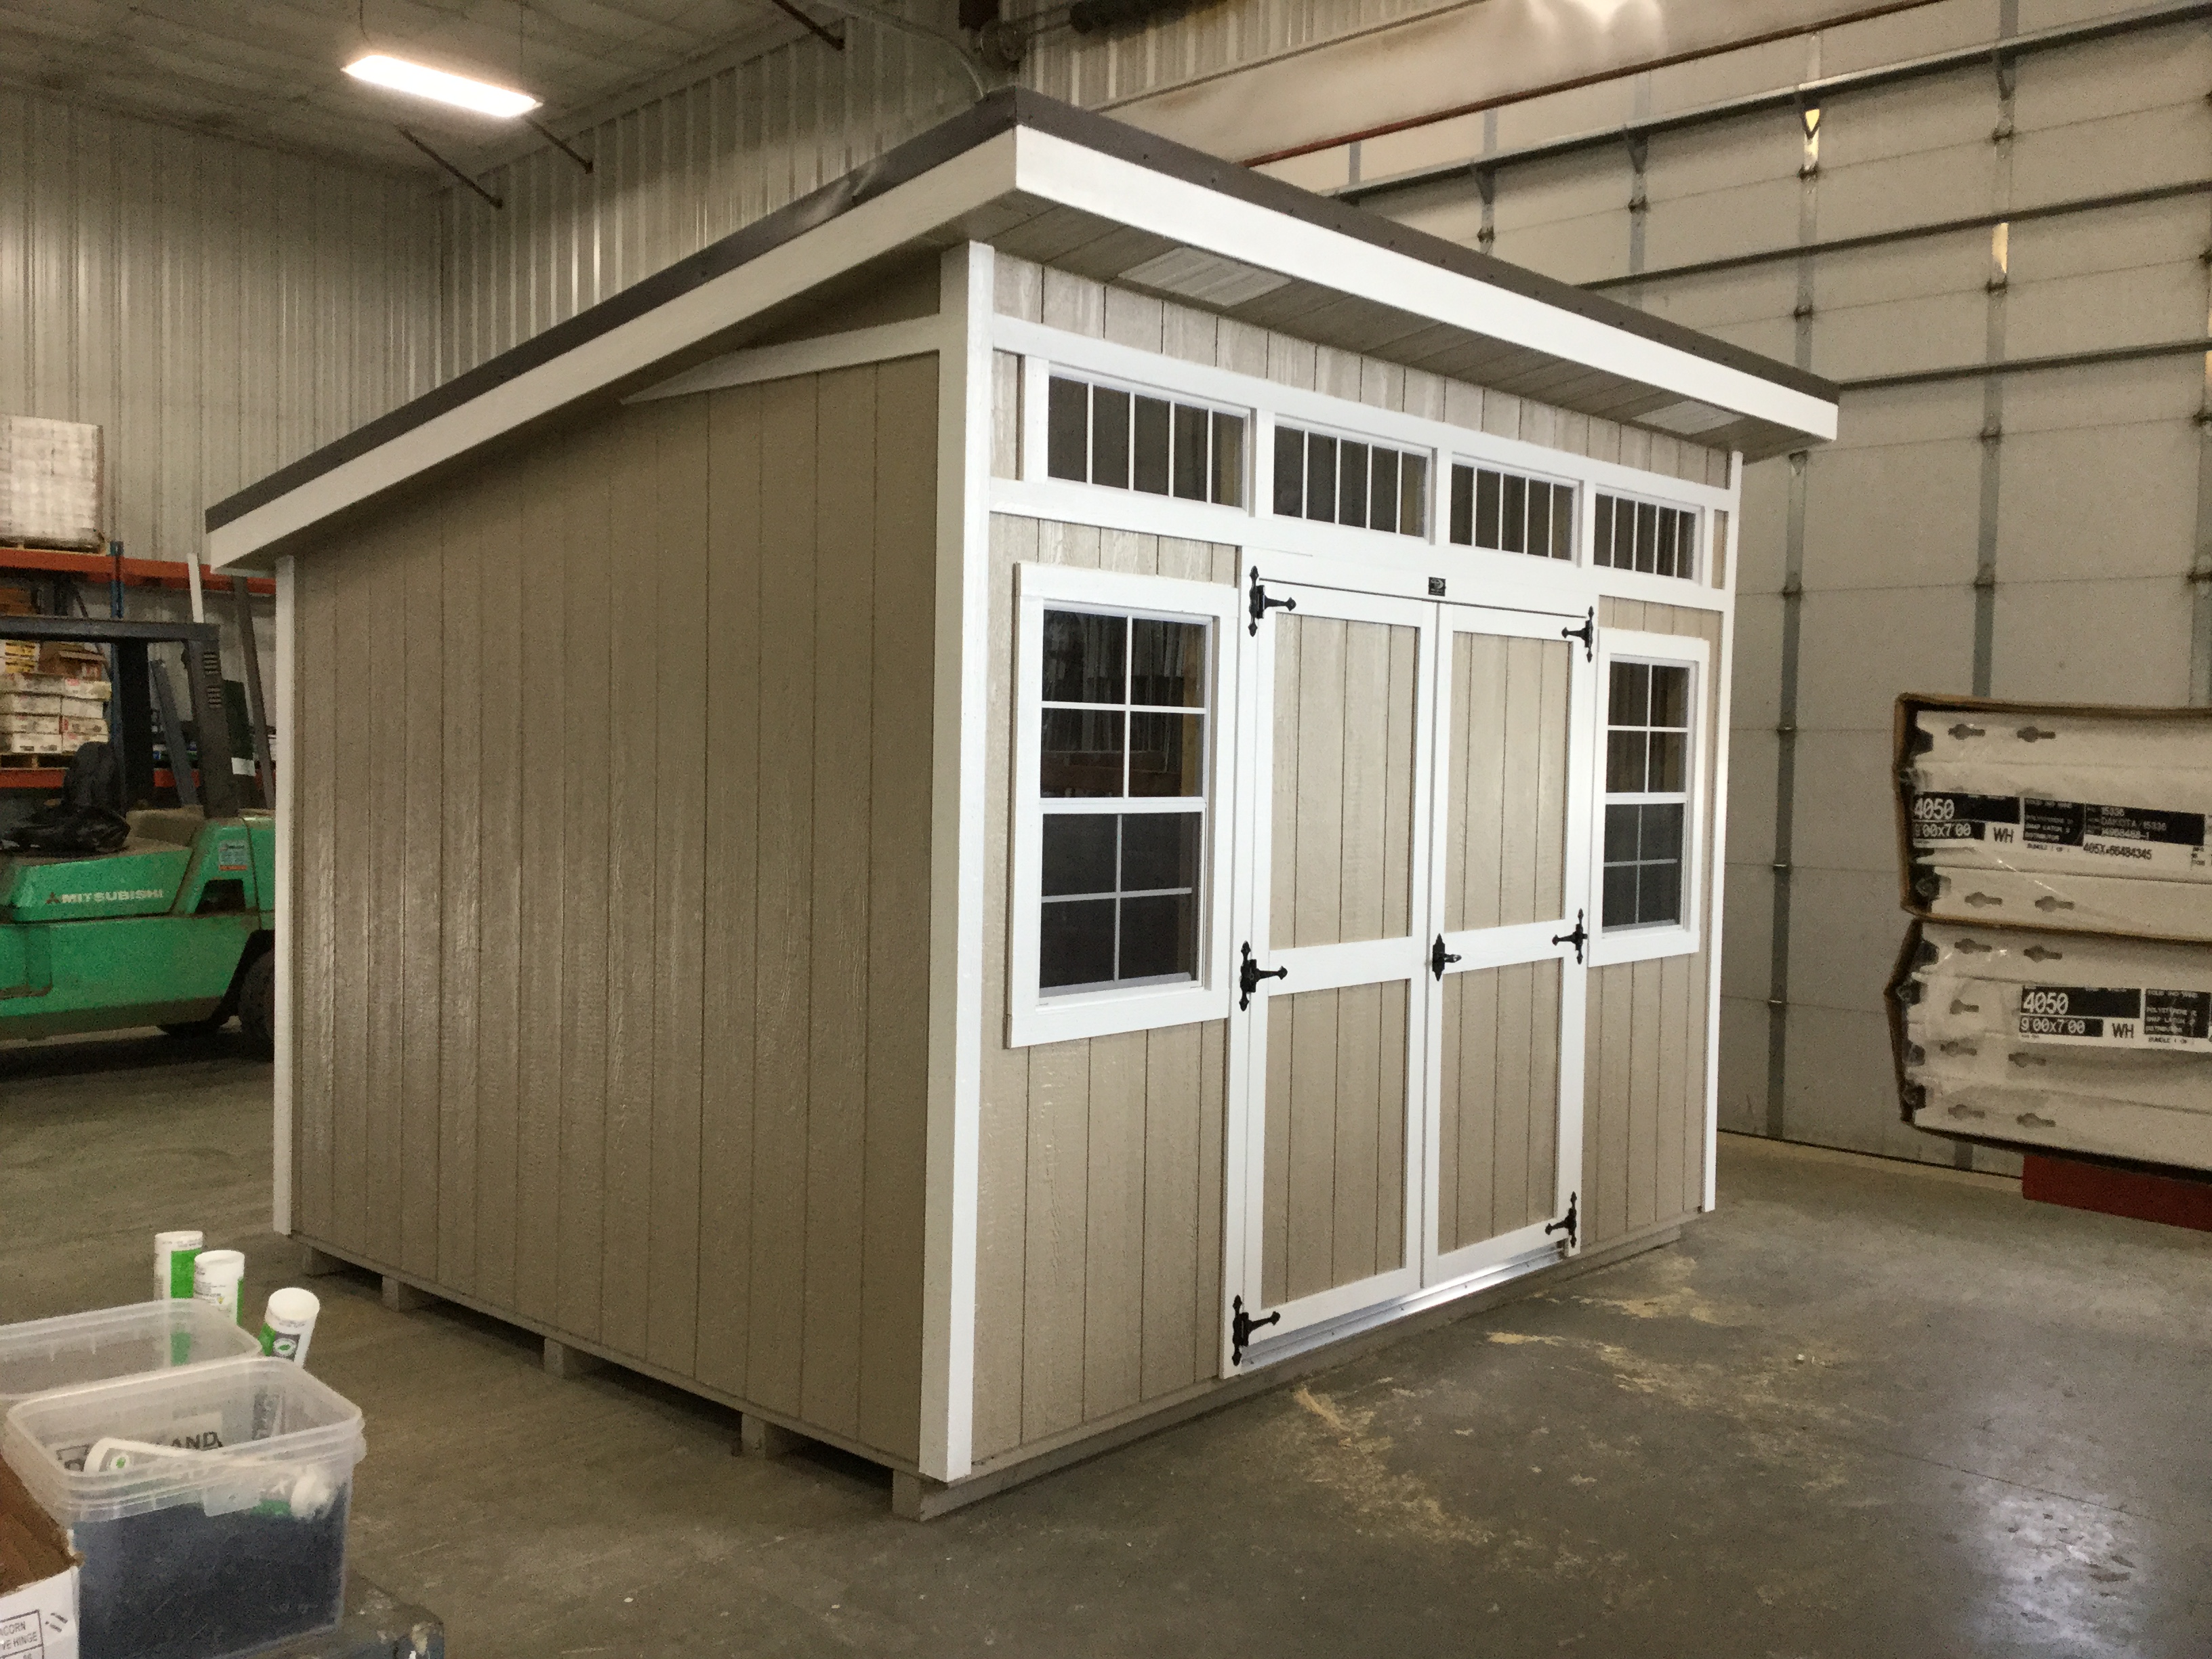 tuff shed pro studio review